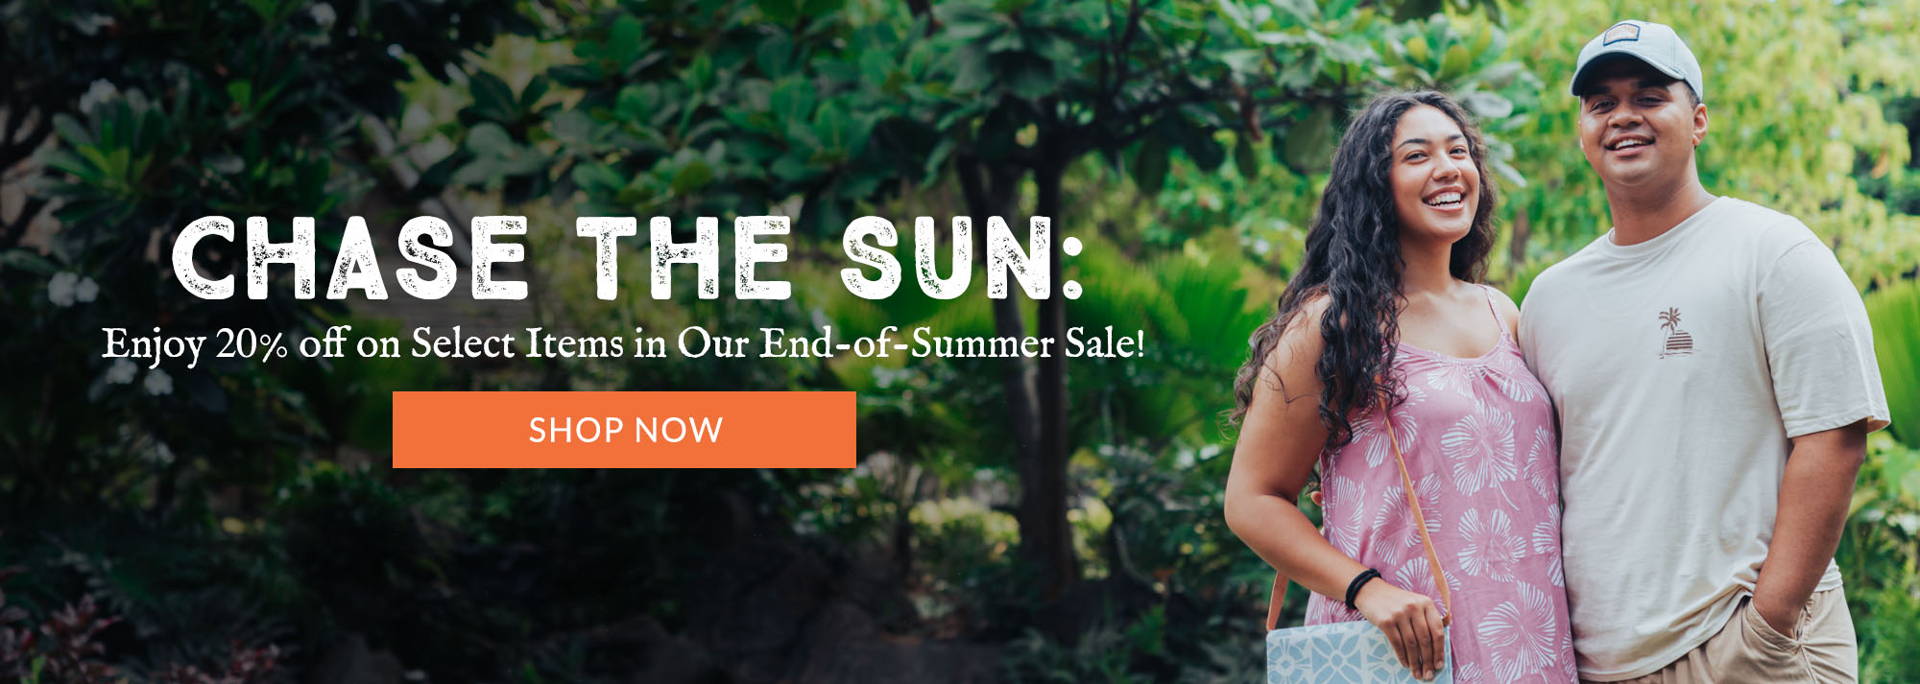 Chase the Sun: Enjoy 15% off on Select Items in Our End-of-Summer Sale!